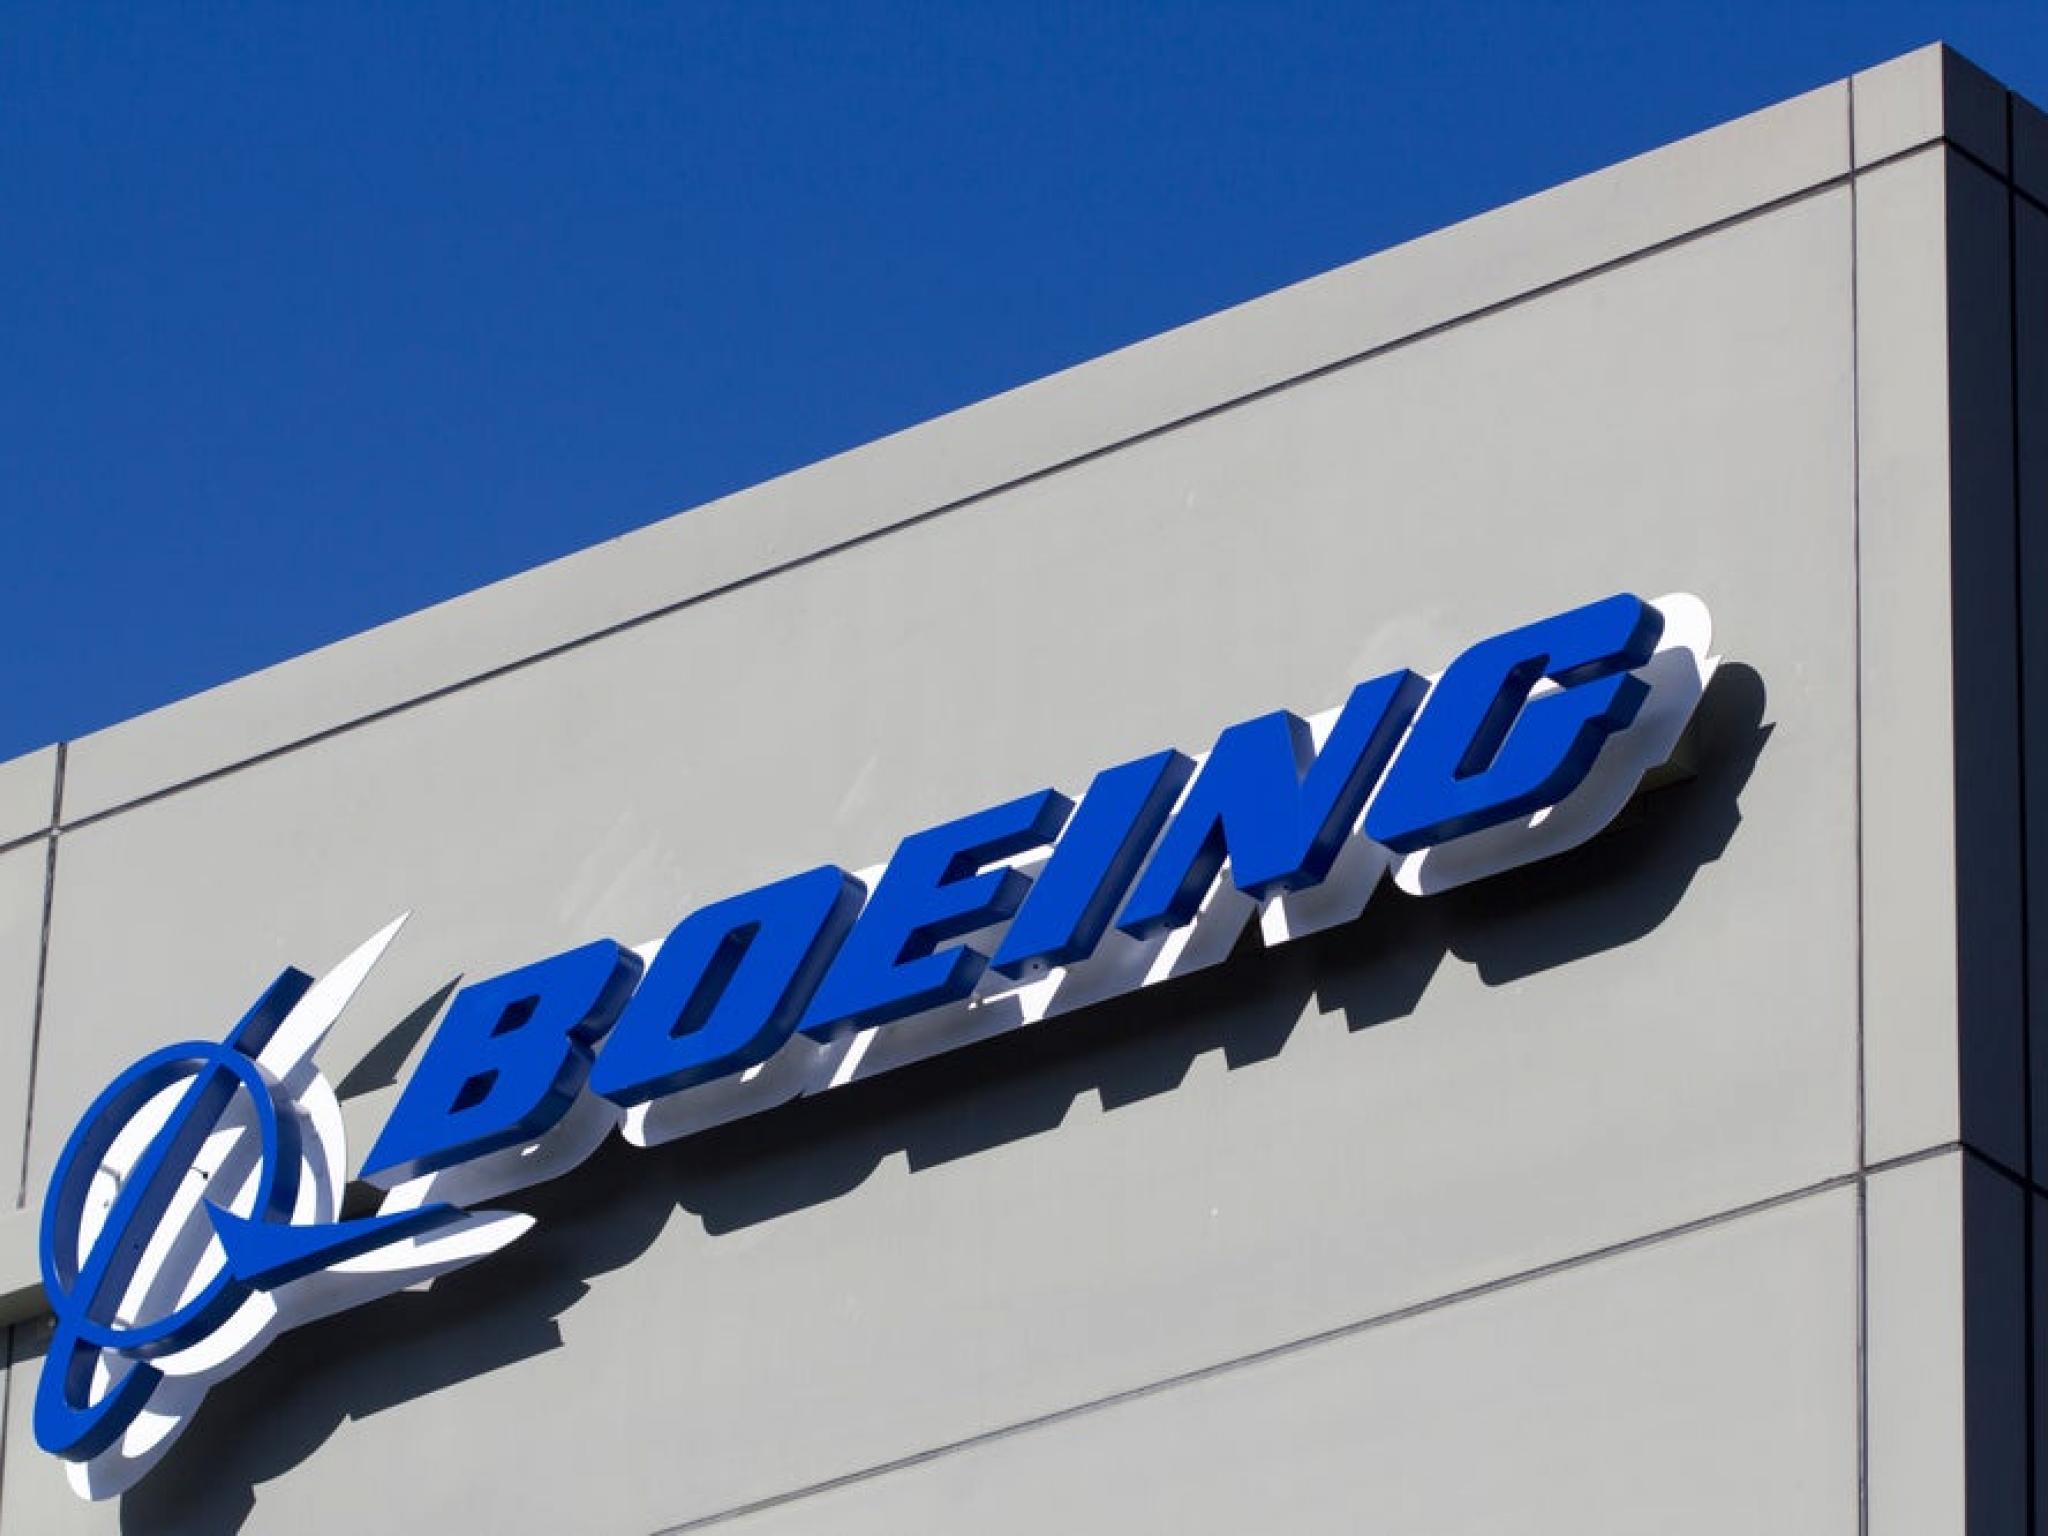  boeing-resumes-737-max-deliveries-to-china-after-regulatory-delay-report 